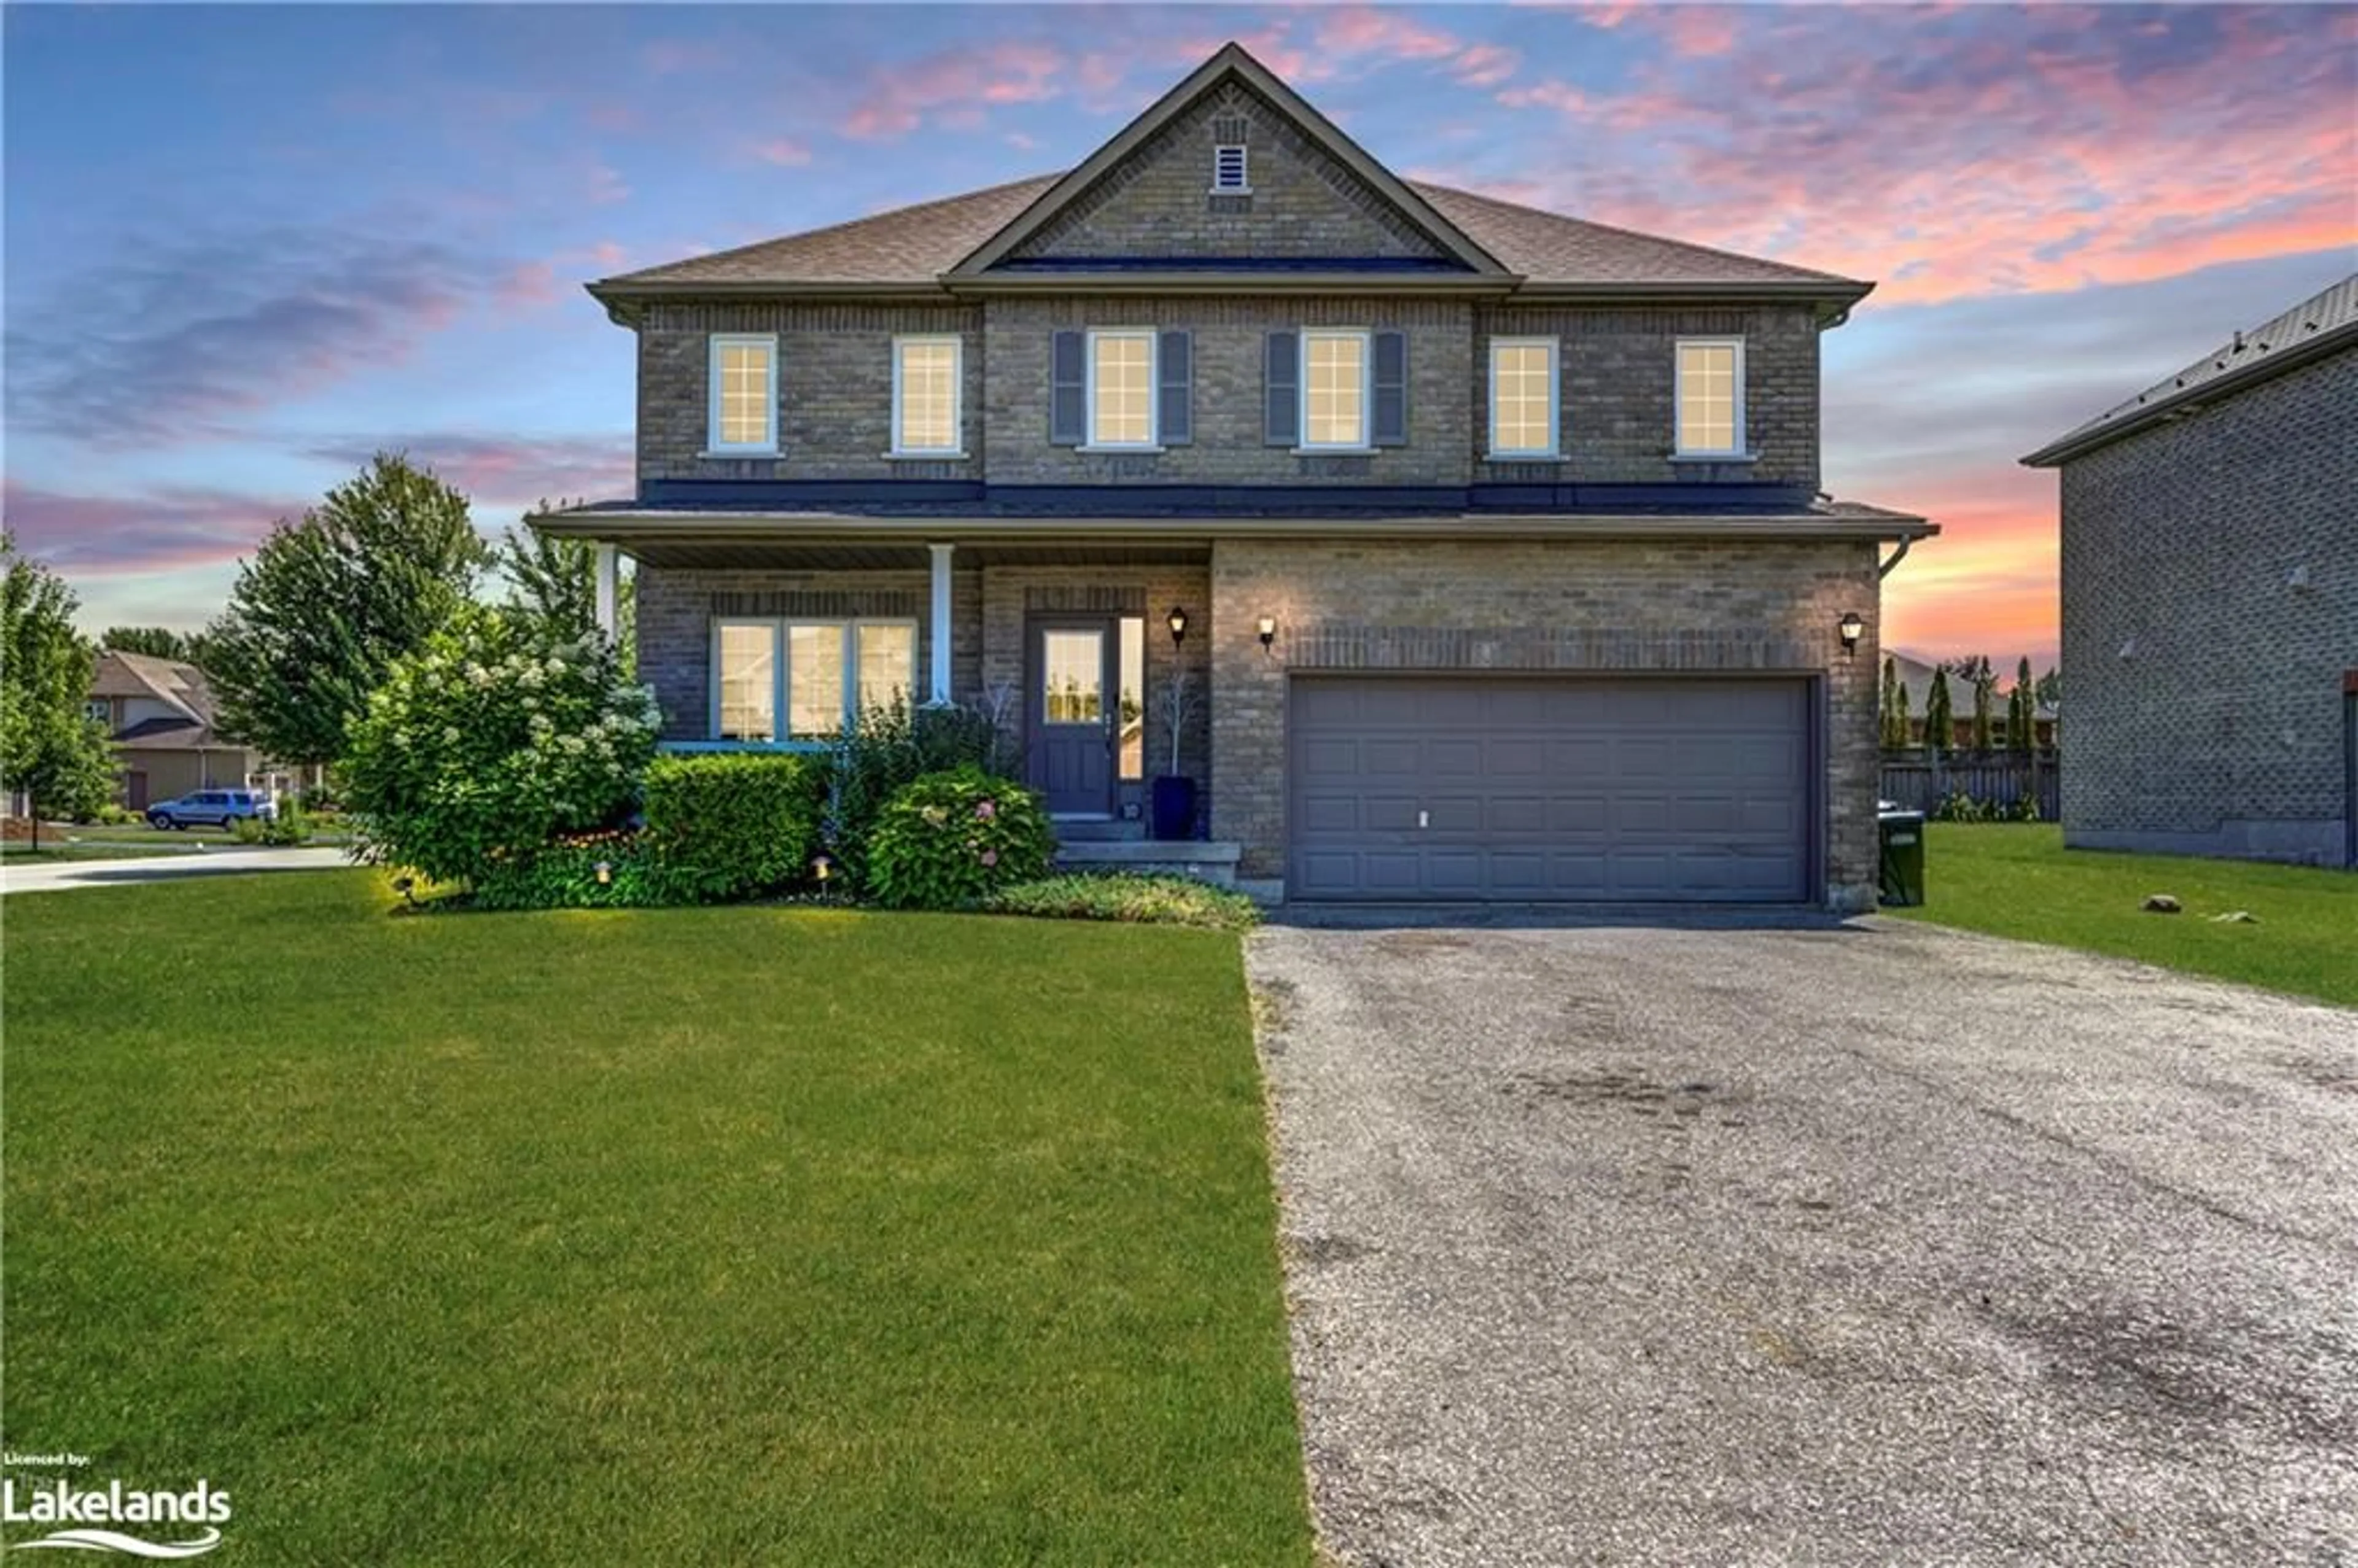 Frontside or backside of a home for 10 Mair Mills Dr, Collingwood Ontario L9Y 0A8